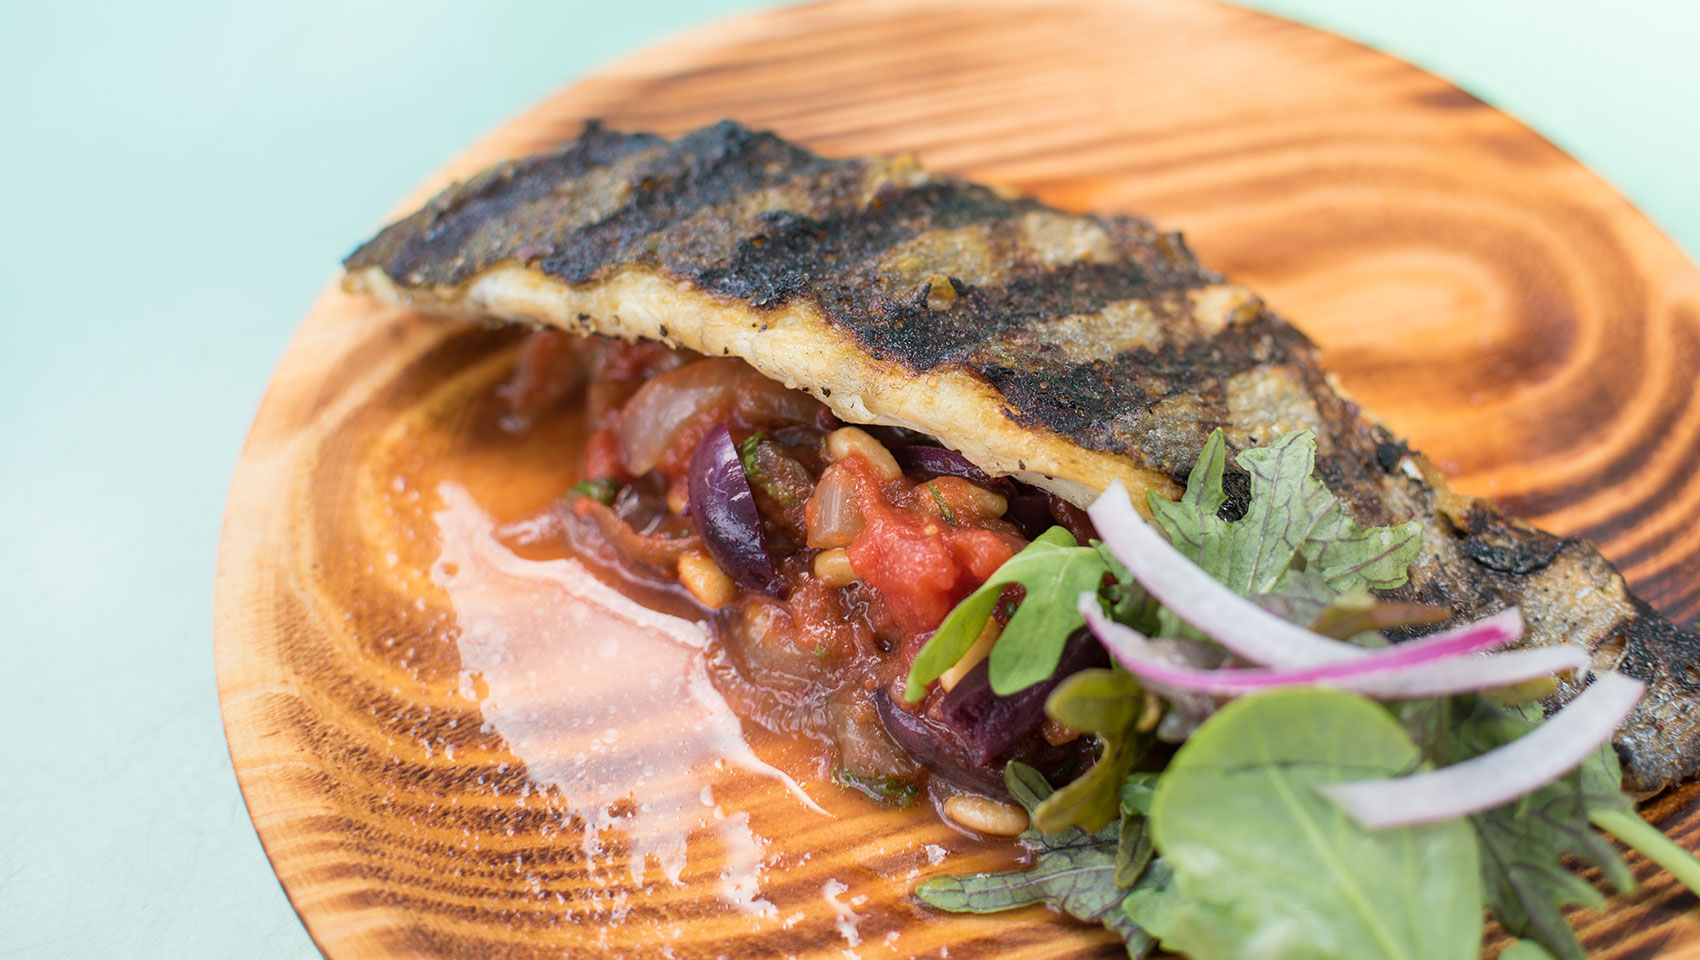 local-grilled-fish-provencale-with-tomatoes-garlic-onions-and-herbs-photo-credit-adorned-photography